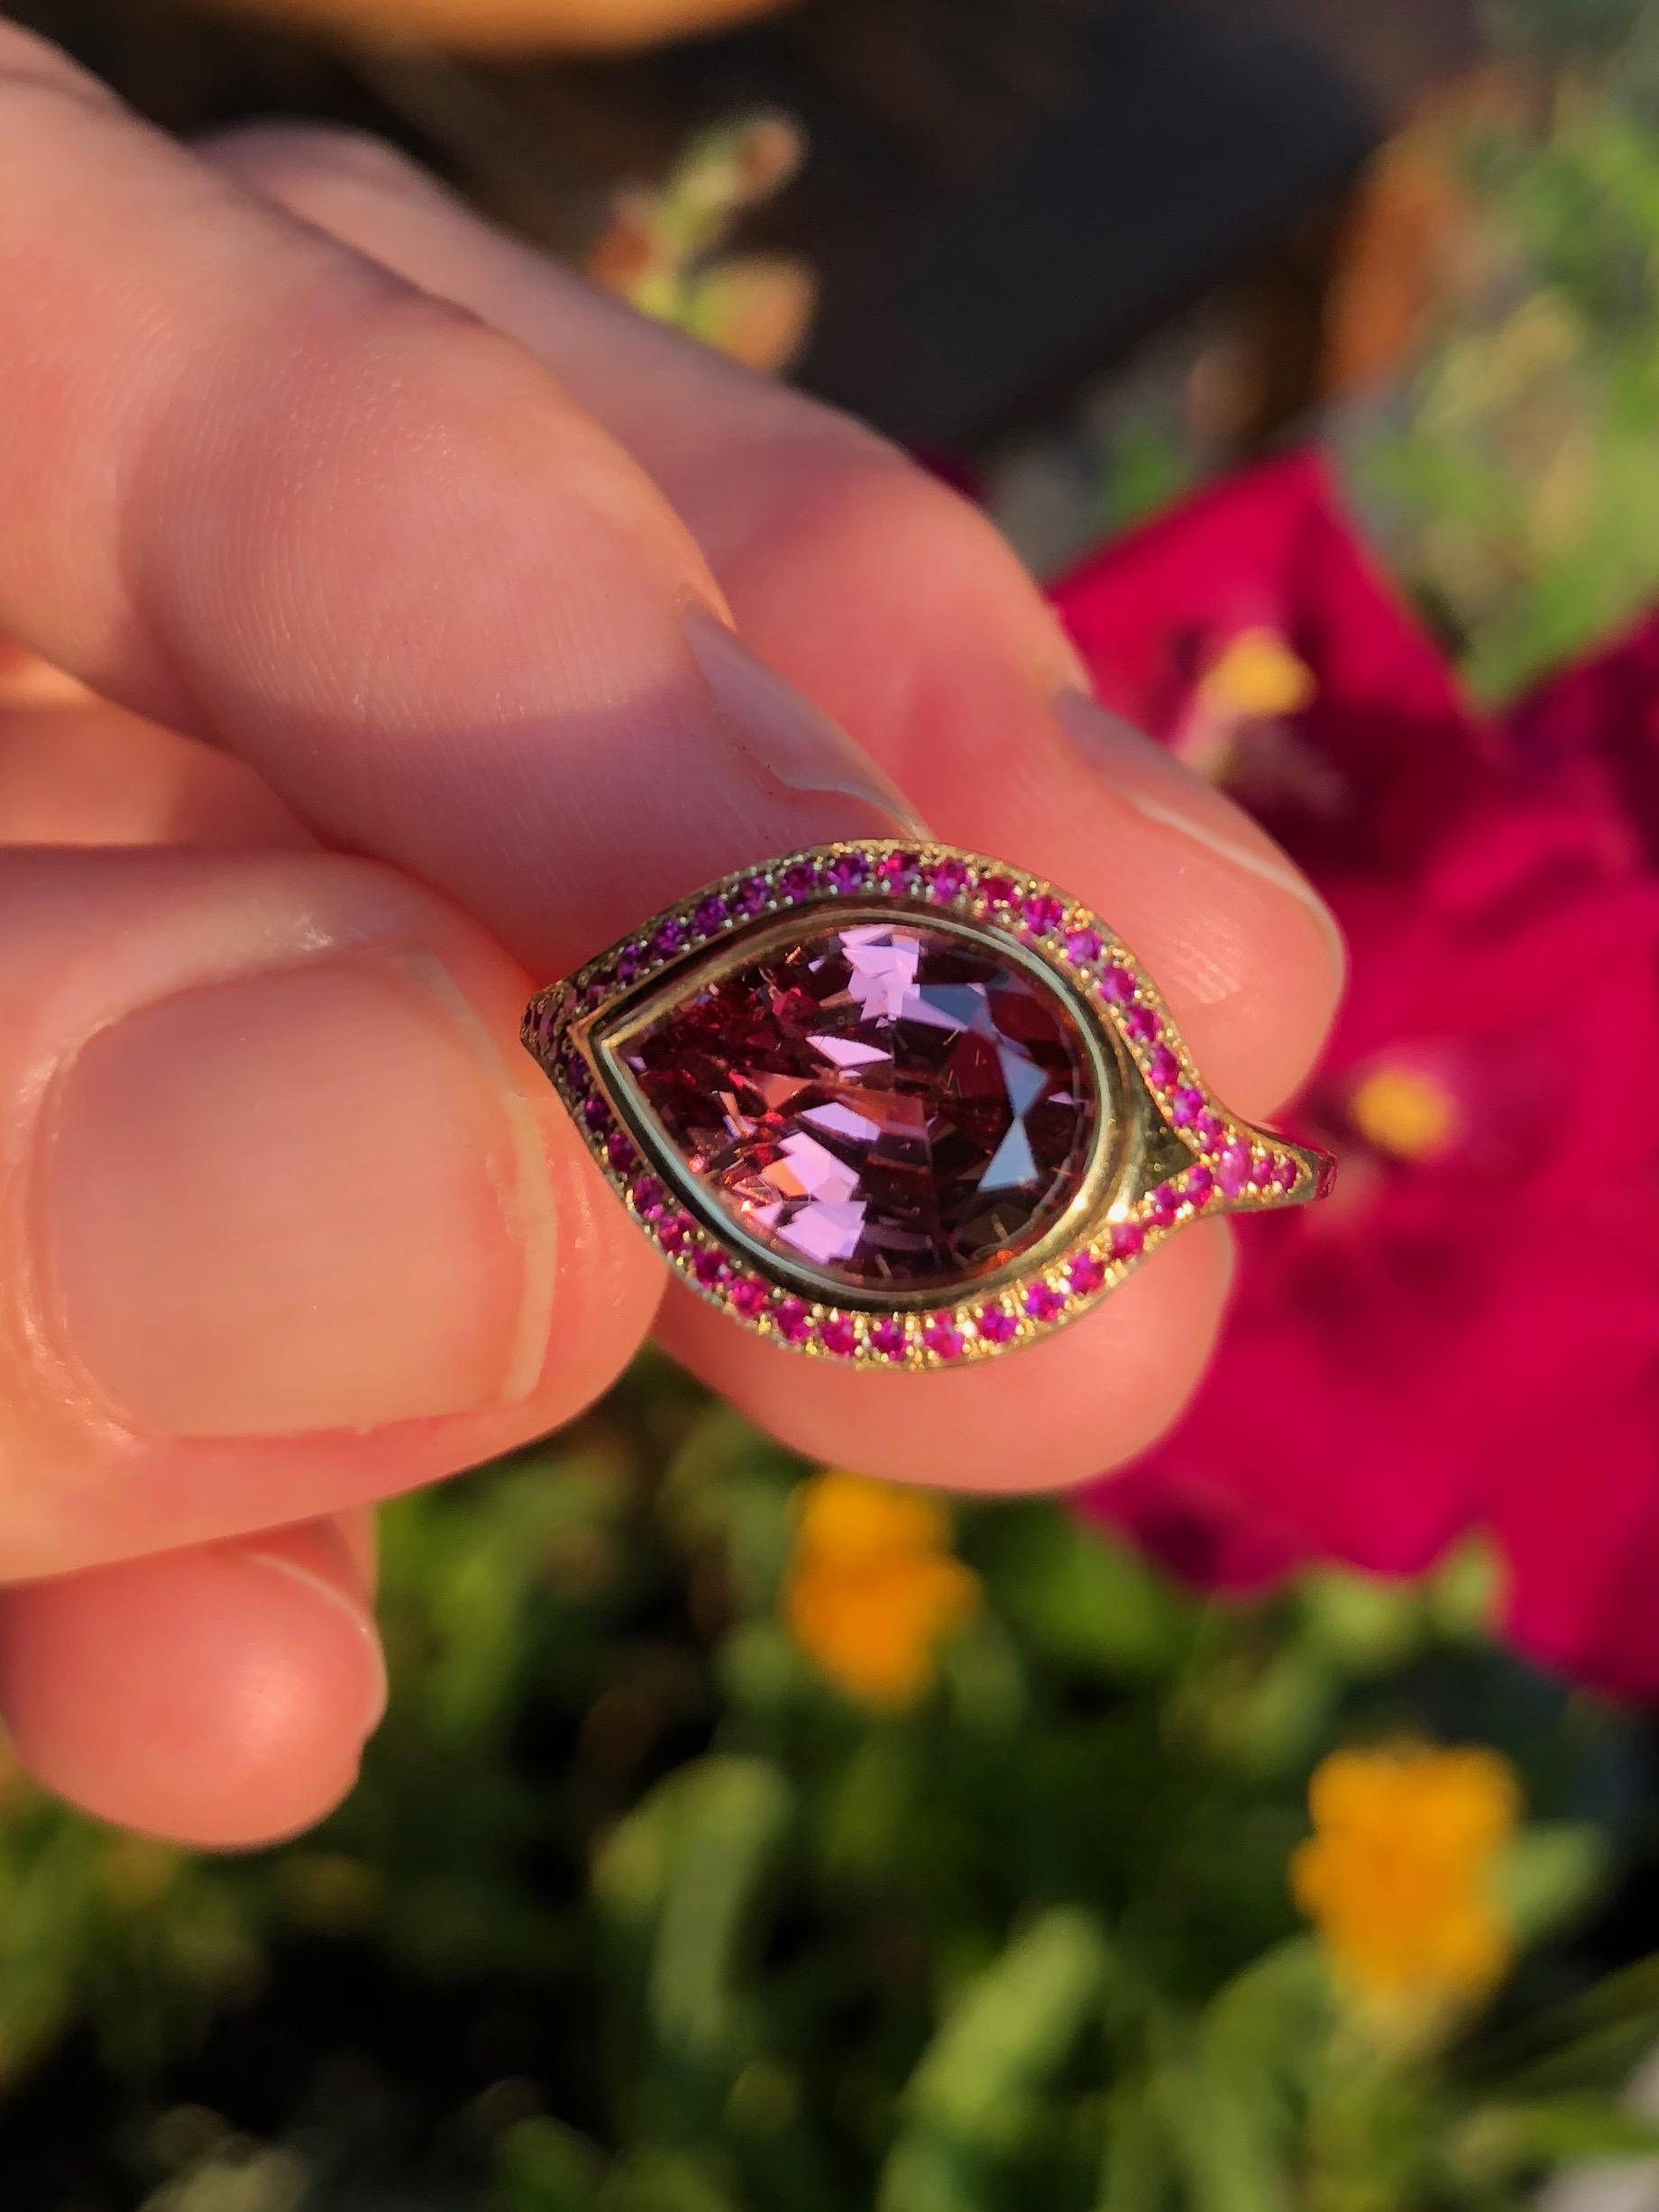 A stunning Mahenge Malaya Garnet (4.07 carats 11.5x8.5x5.7mm)- from Tanzania, encircled with fine Mozambique Gemfields rubies. This ring gives and gives. One of a kind. Absolutely stunning in all light. A combination of old world techniques that